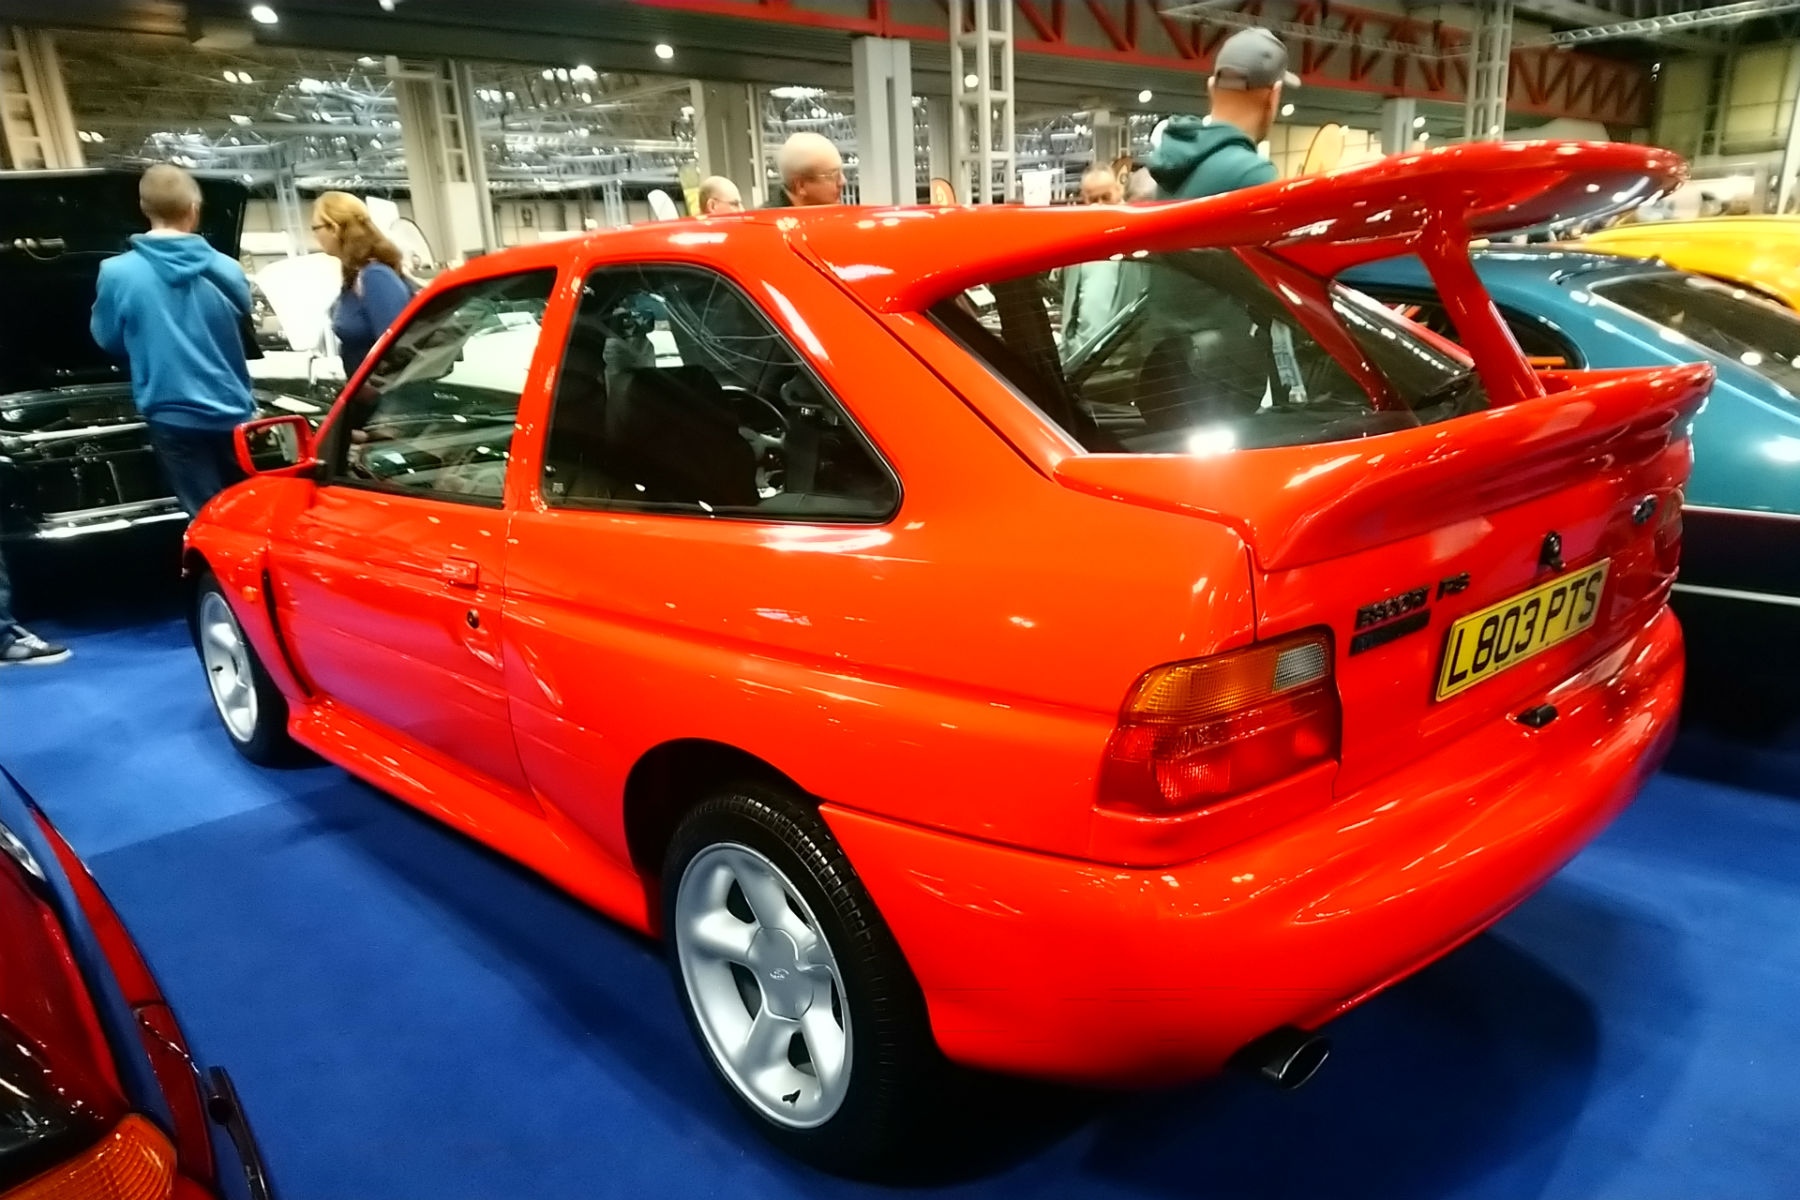 Ford Escort RS Cosworth at the 2018 NEC Classic Motor Show